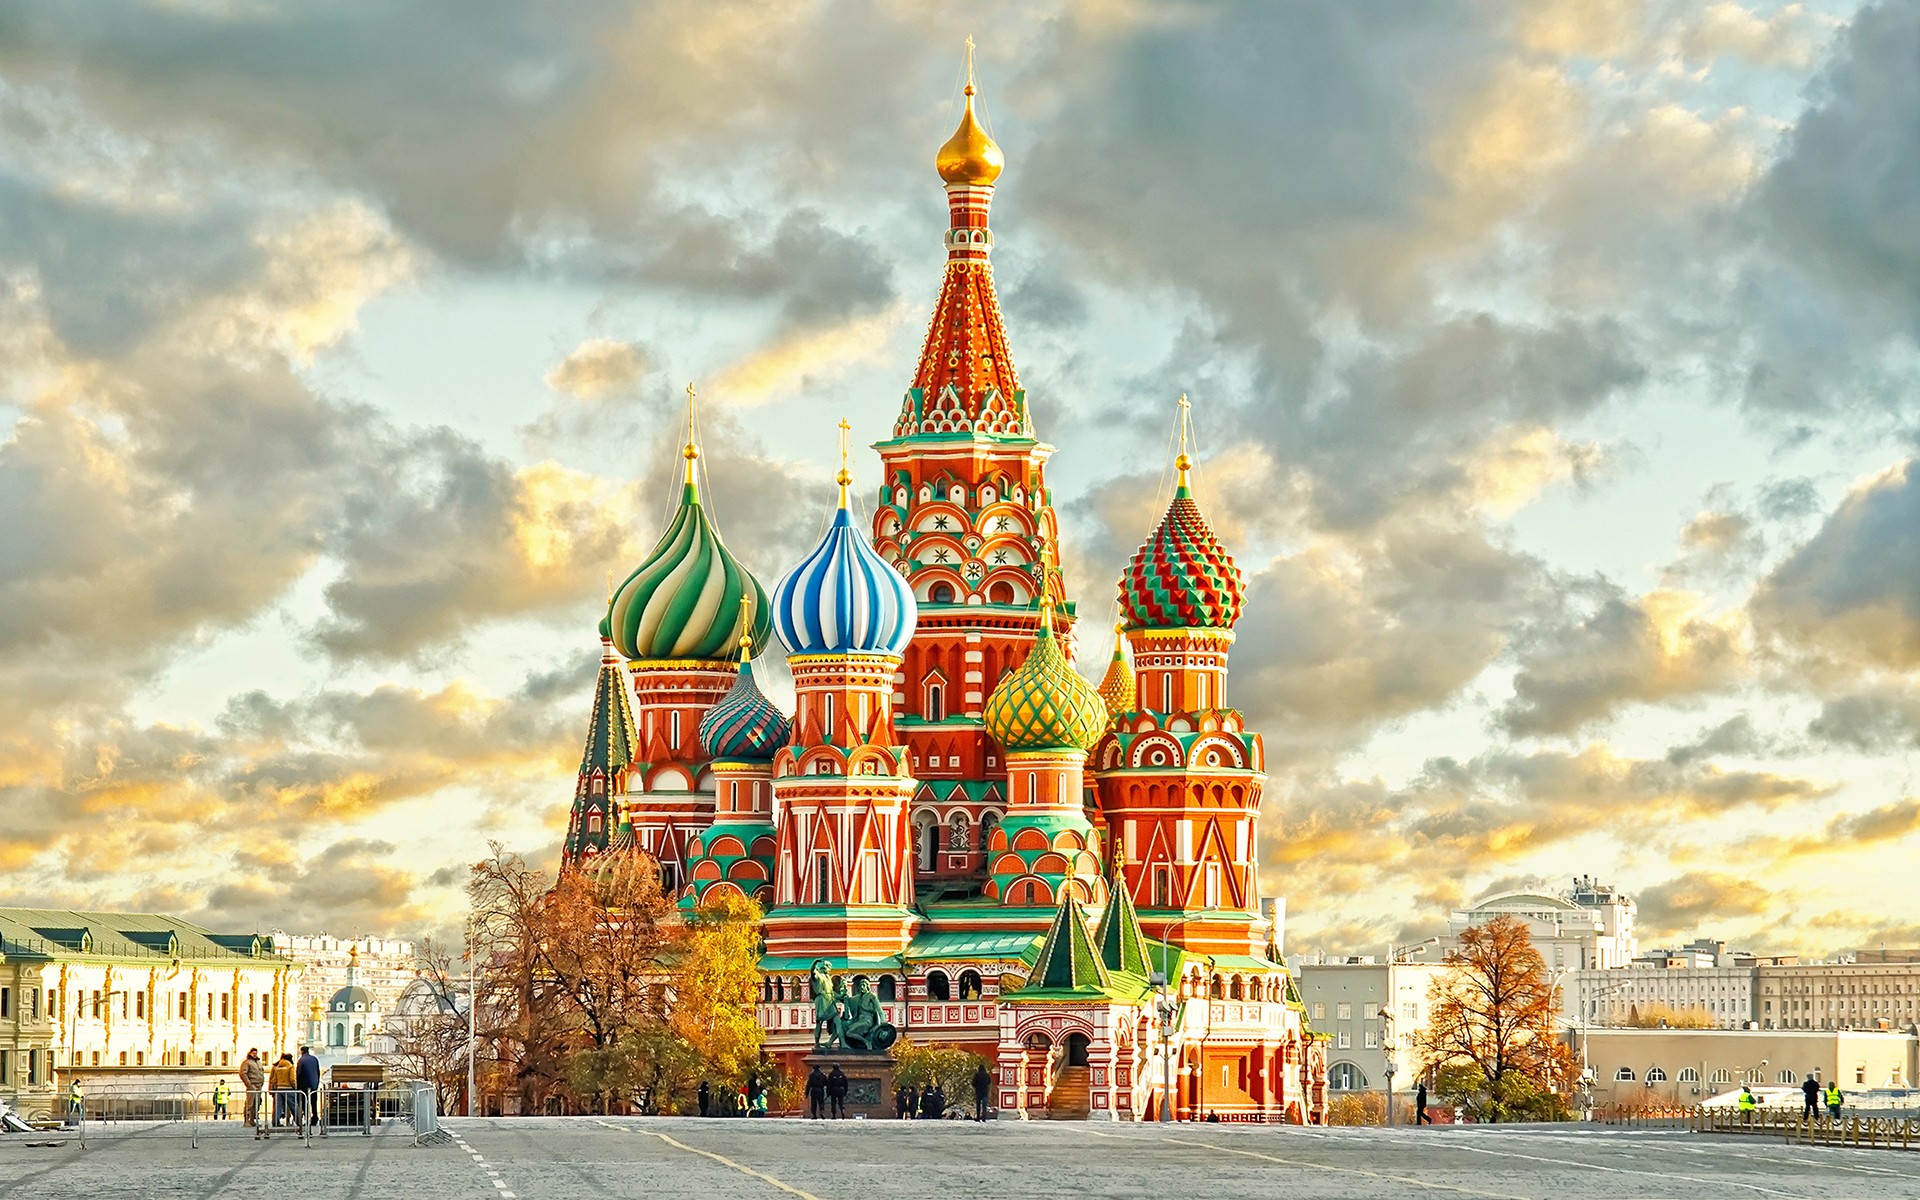 General 1920x1200 Russia photography city Moscow Kremlin Saint Basil's Cathedral landmark Europe historical buildings